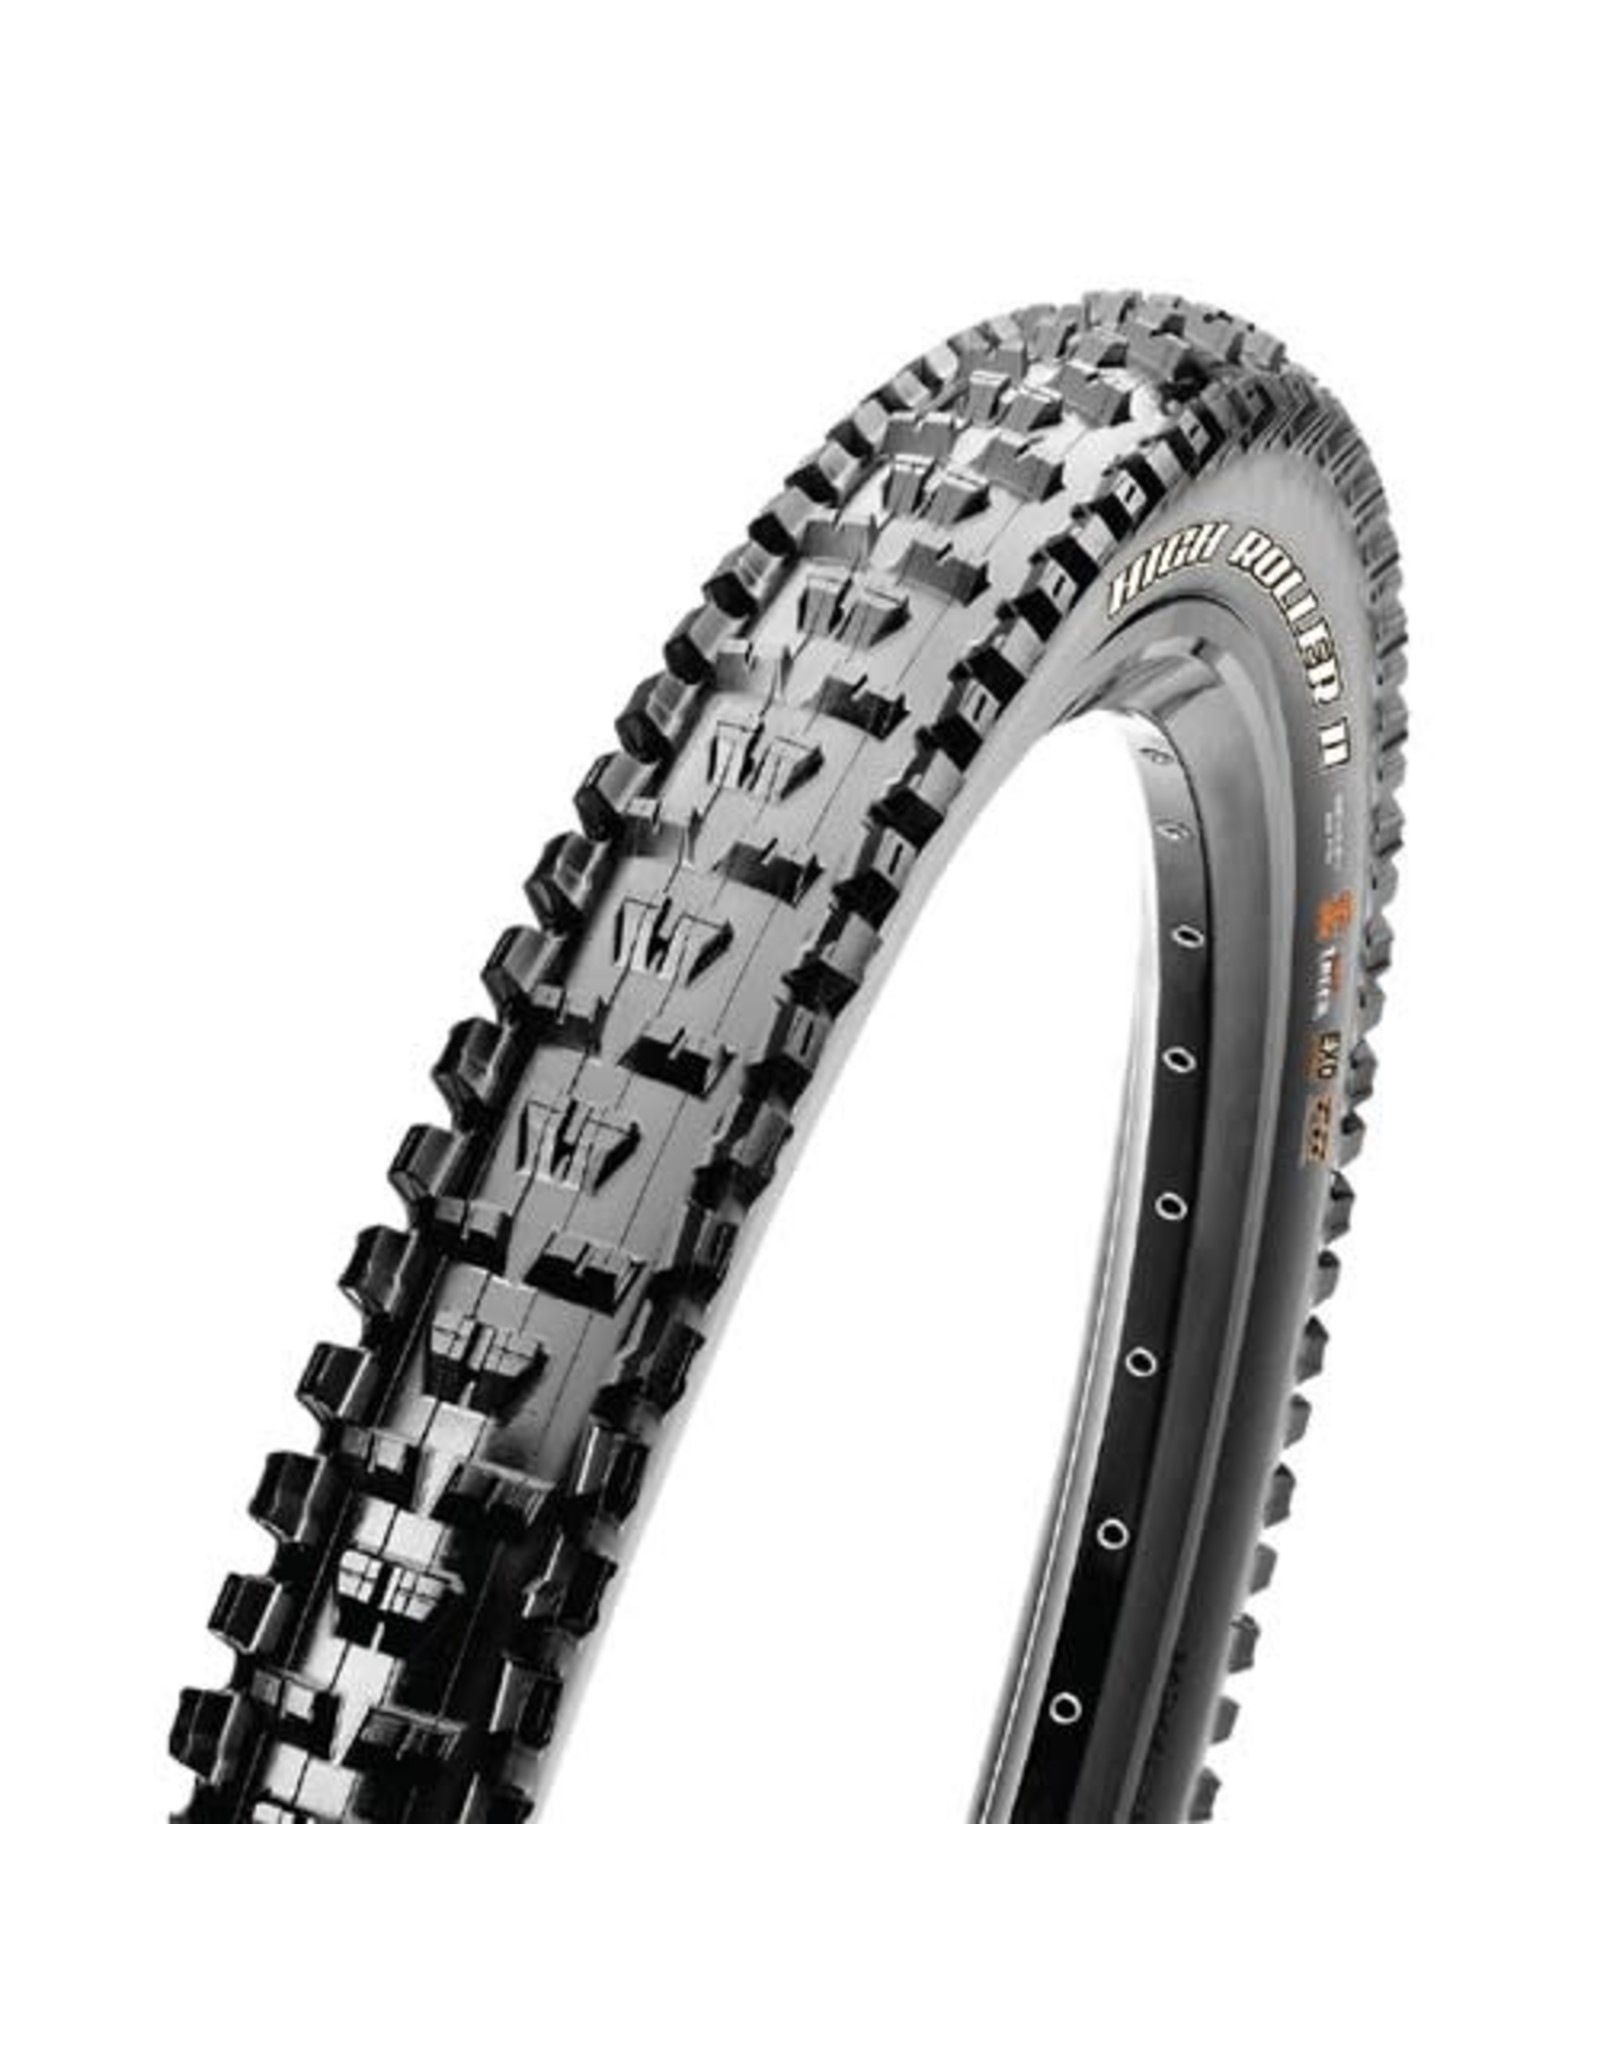 MAXXIS MAXXIS HIGH ROLLER 2 27.5 X 2.40” TR EXO FOLD 60TPI TYRE